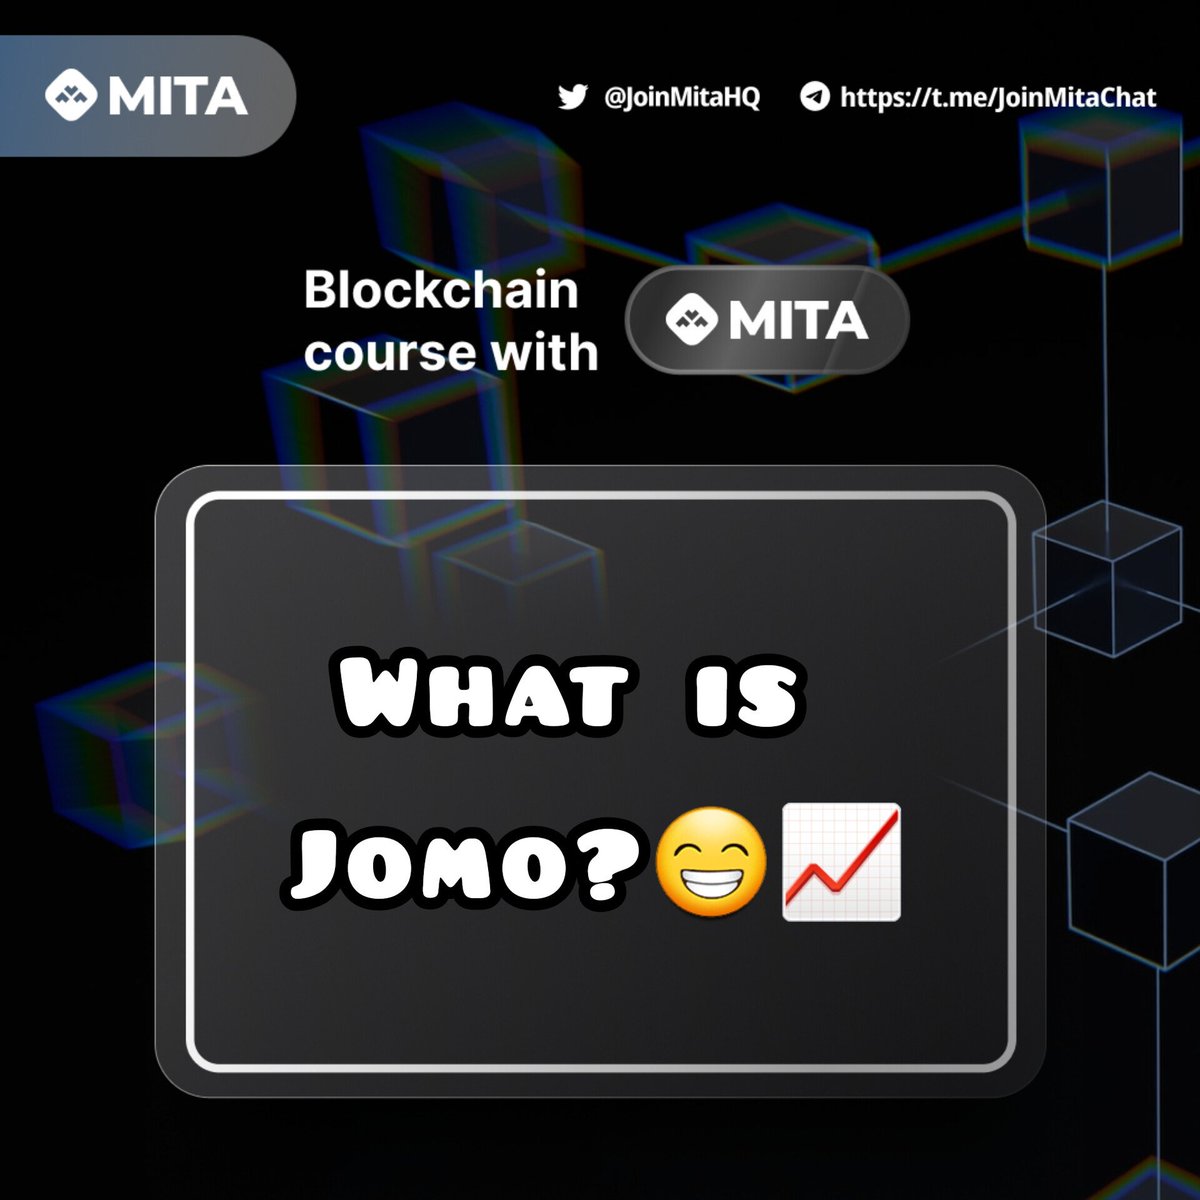 Blockchain course with MITA #Week39 📜✍

👨‍🏫What is JOMO? 😁📈

#JOMO is the abbreviation of ‘Joy Of Missing Out’ and refers to a #Trader who is happy that he has not taken a certain #position after a considerable #price drop.

🧵 👇